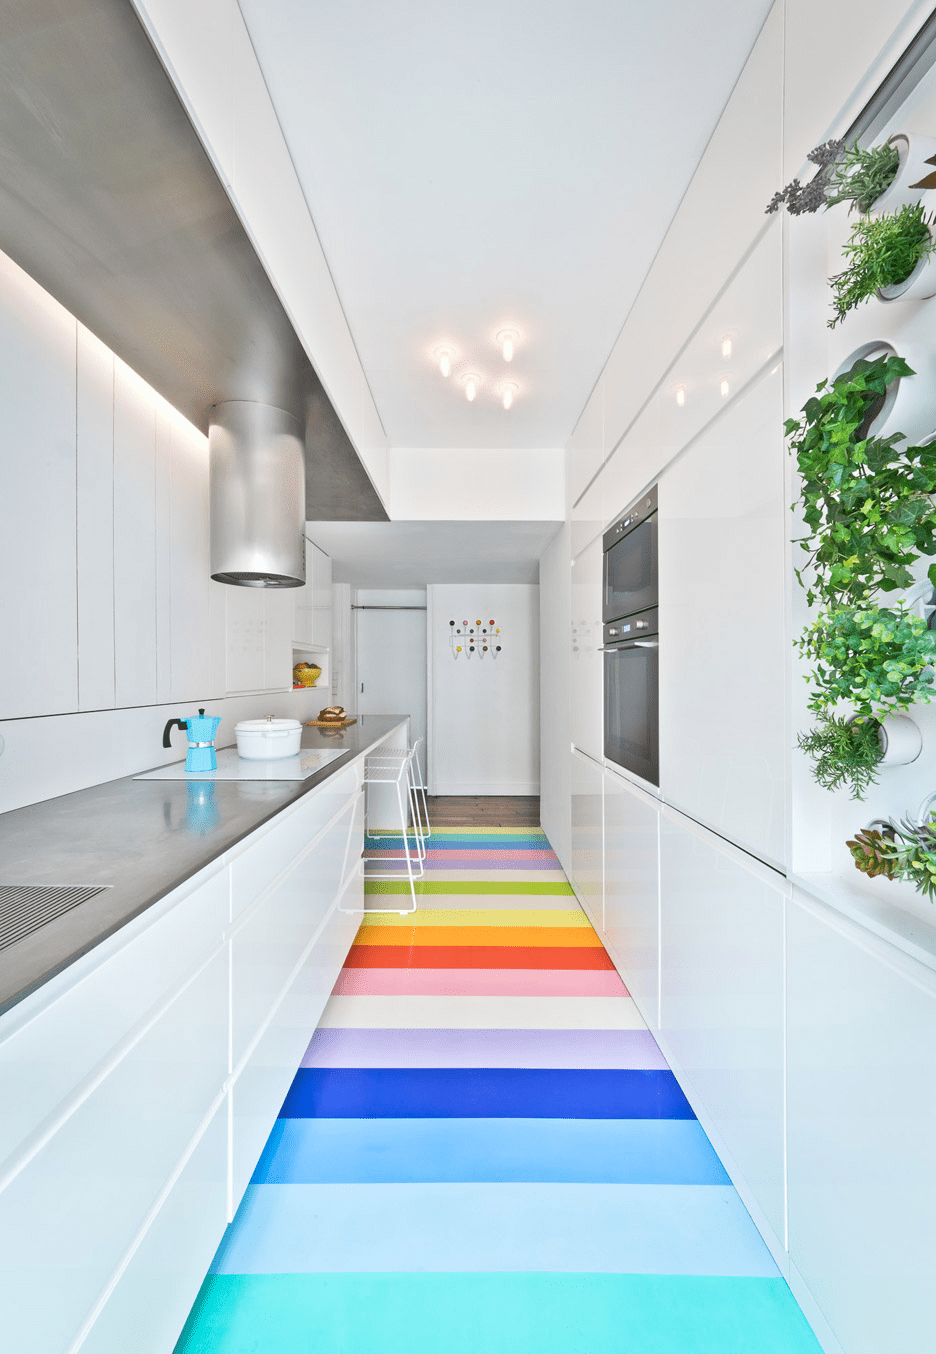 Verst Trouw Een goede vriend Why Rubber Floors Are Great For Kitchens and Bathrooms | Apartment Therapy